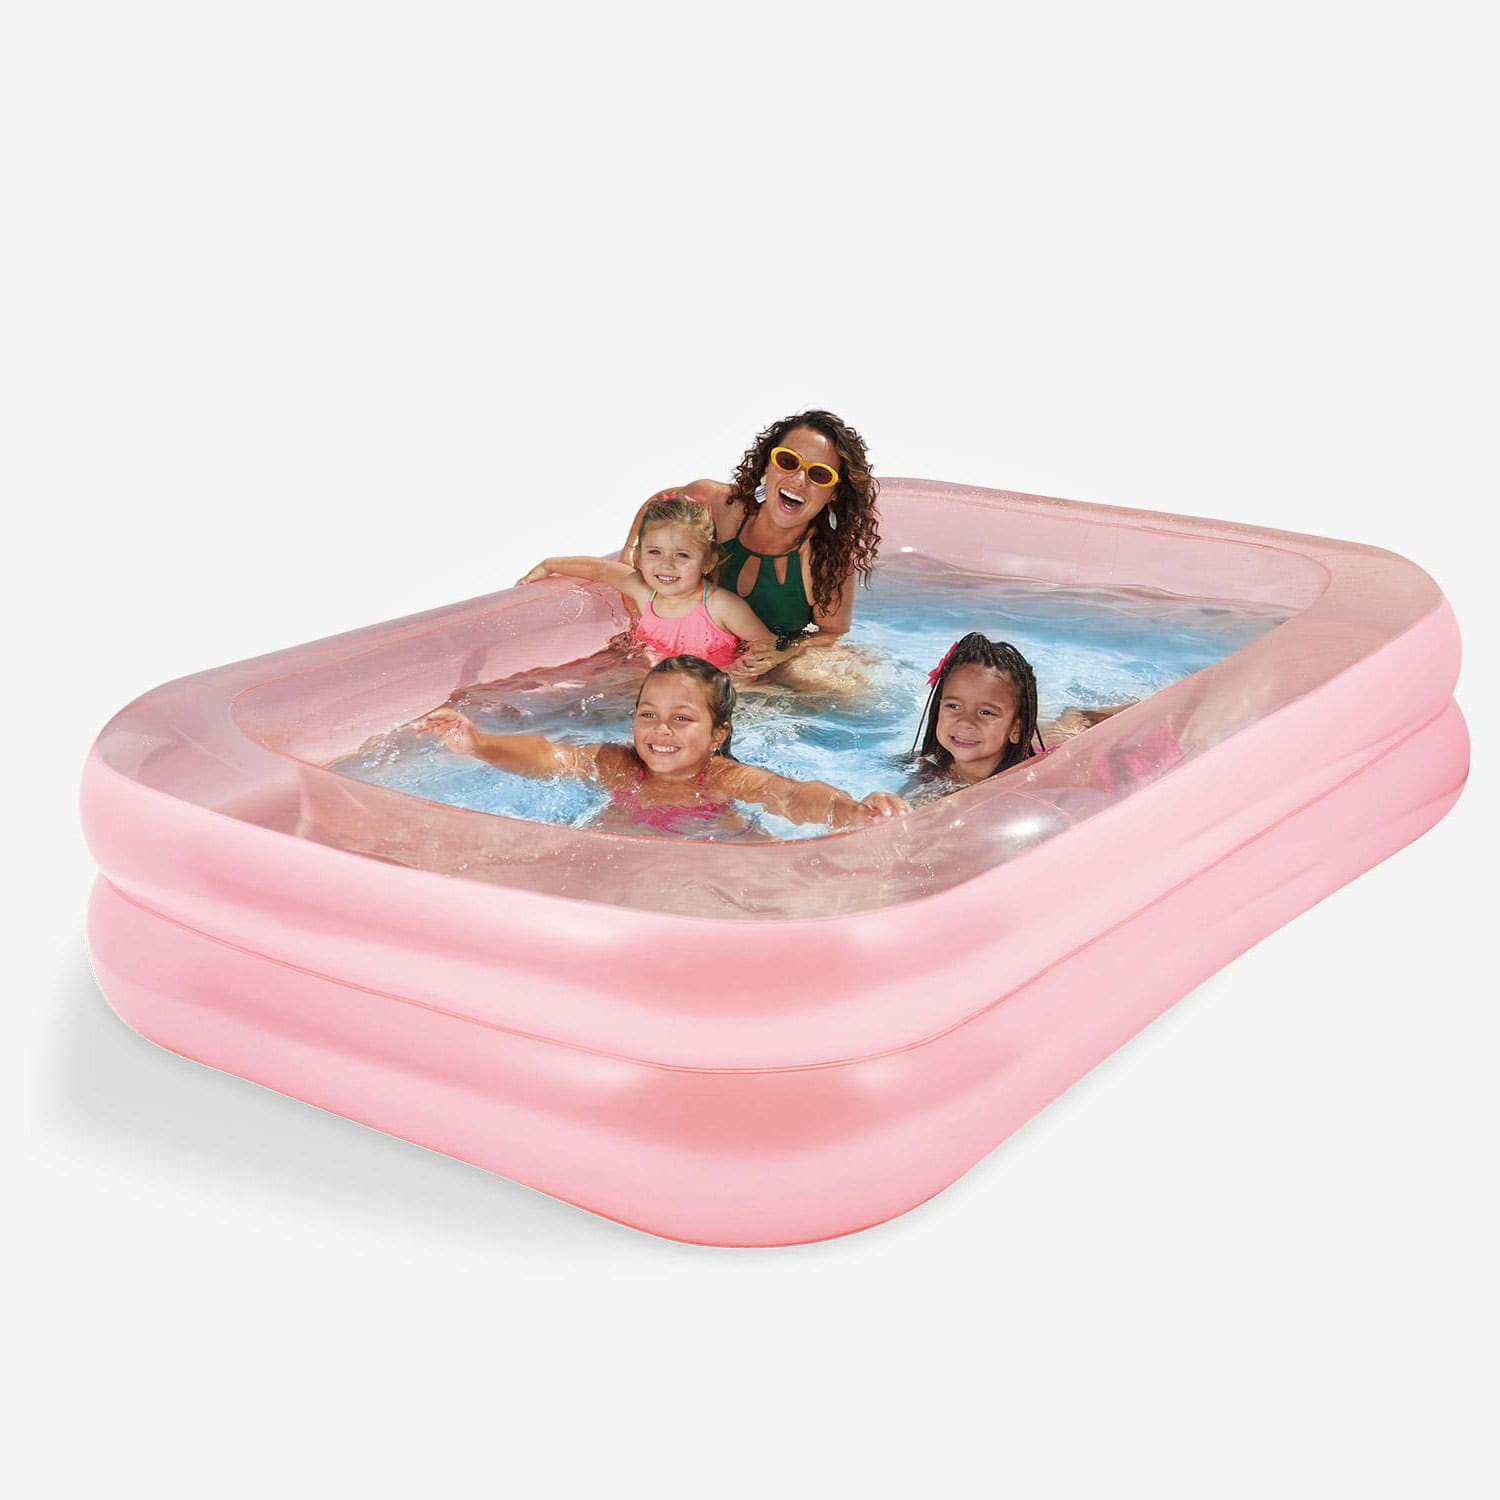 Funsicle Blissful Pool Pink with people